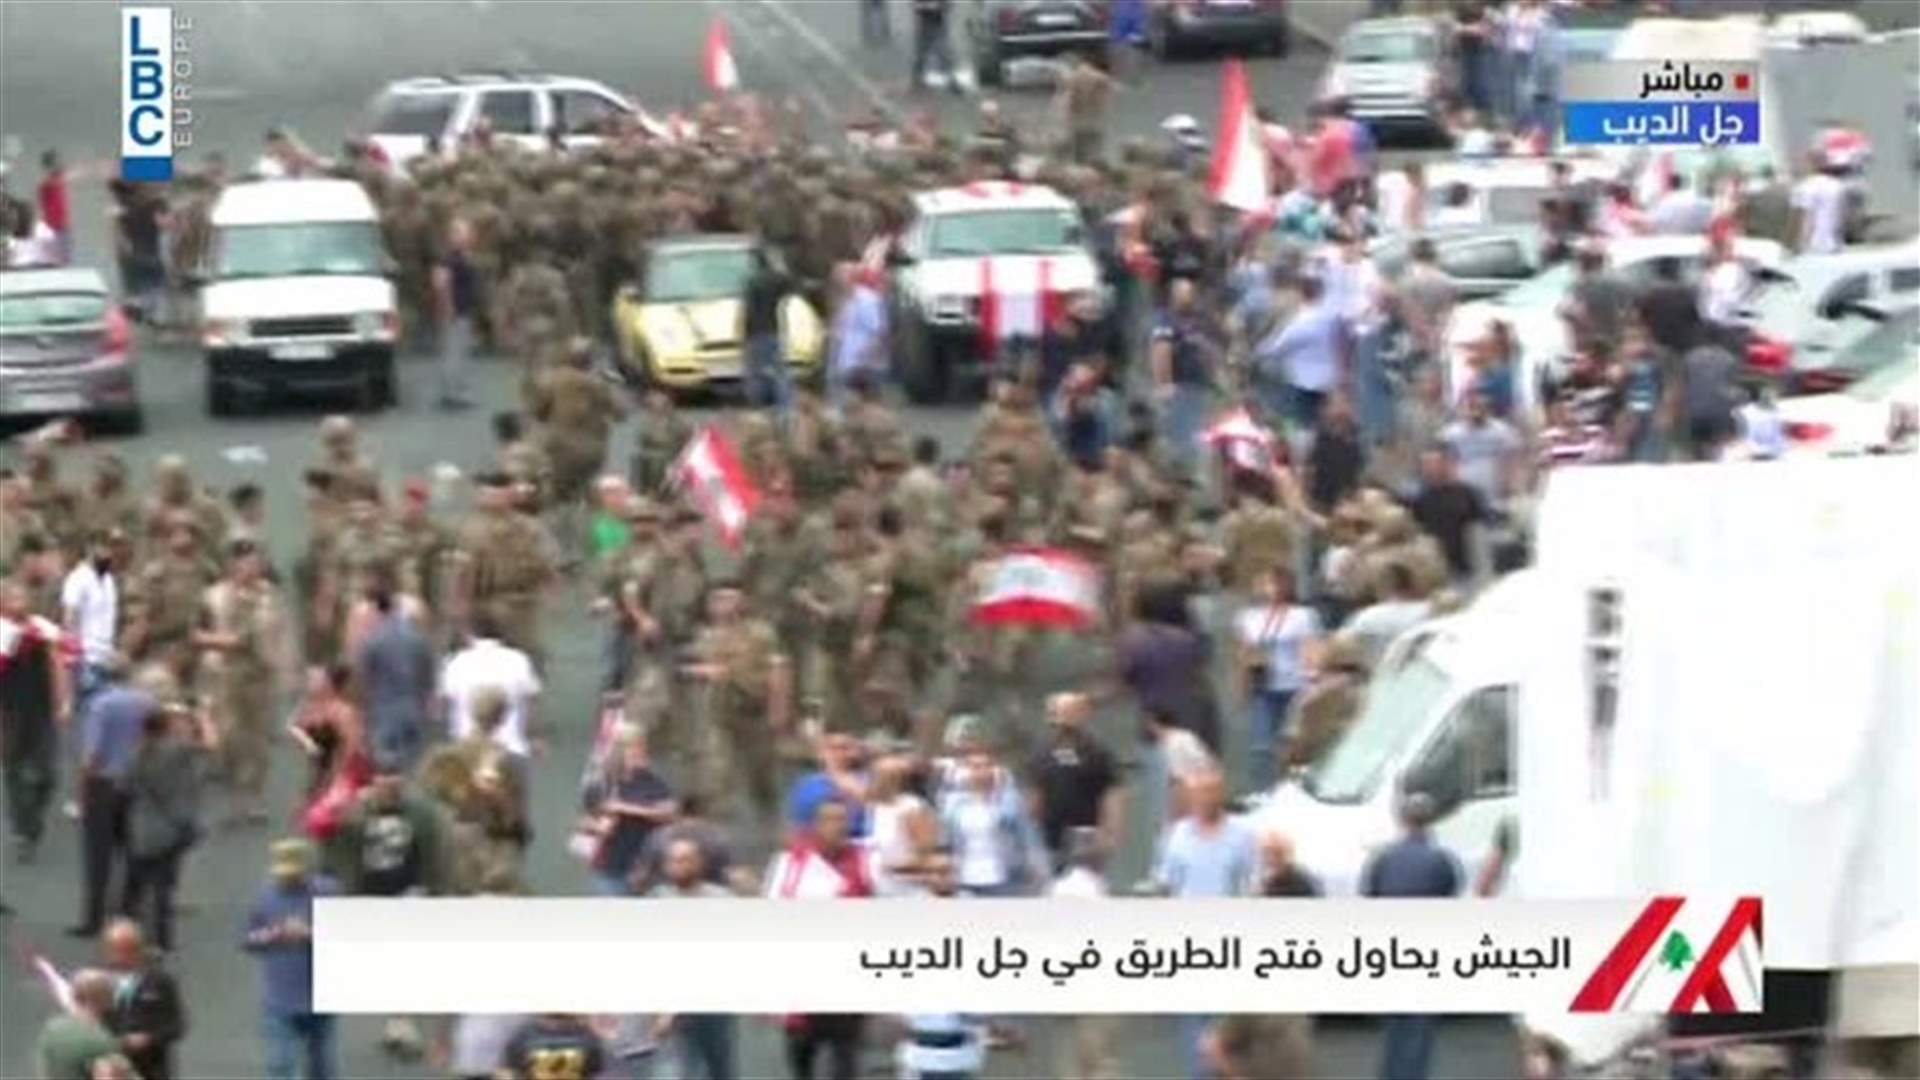 Large army force scuffles with protesters in Jal el-Dib-[VIDEO]